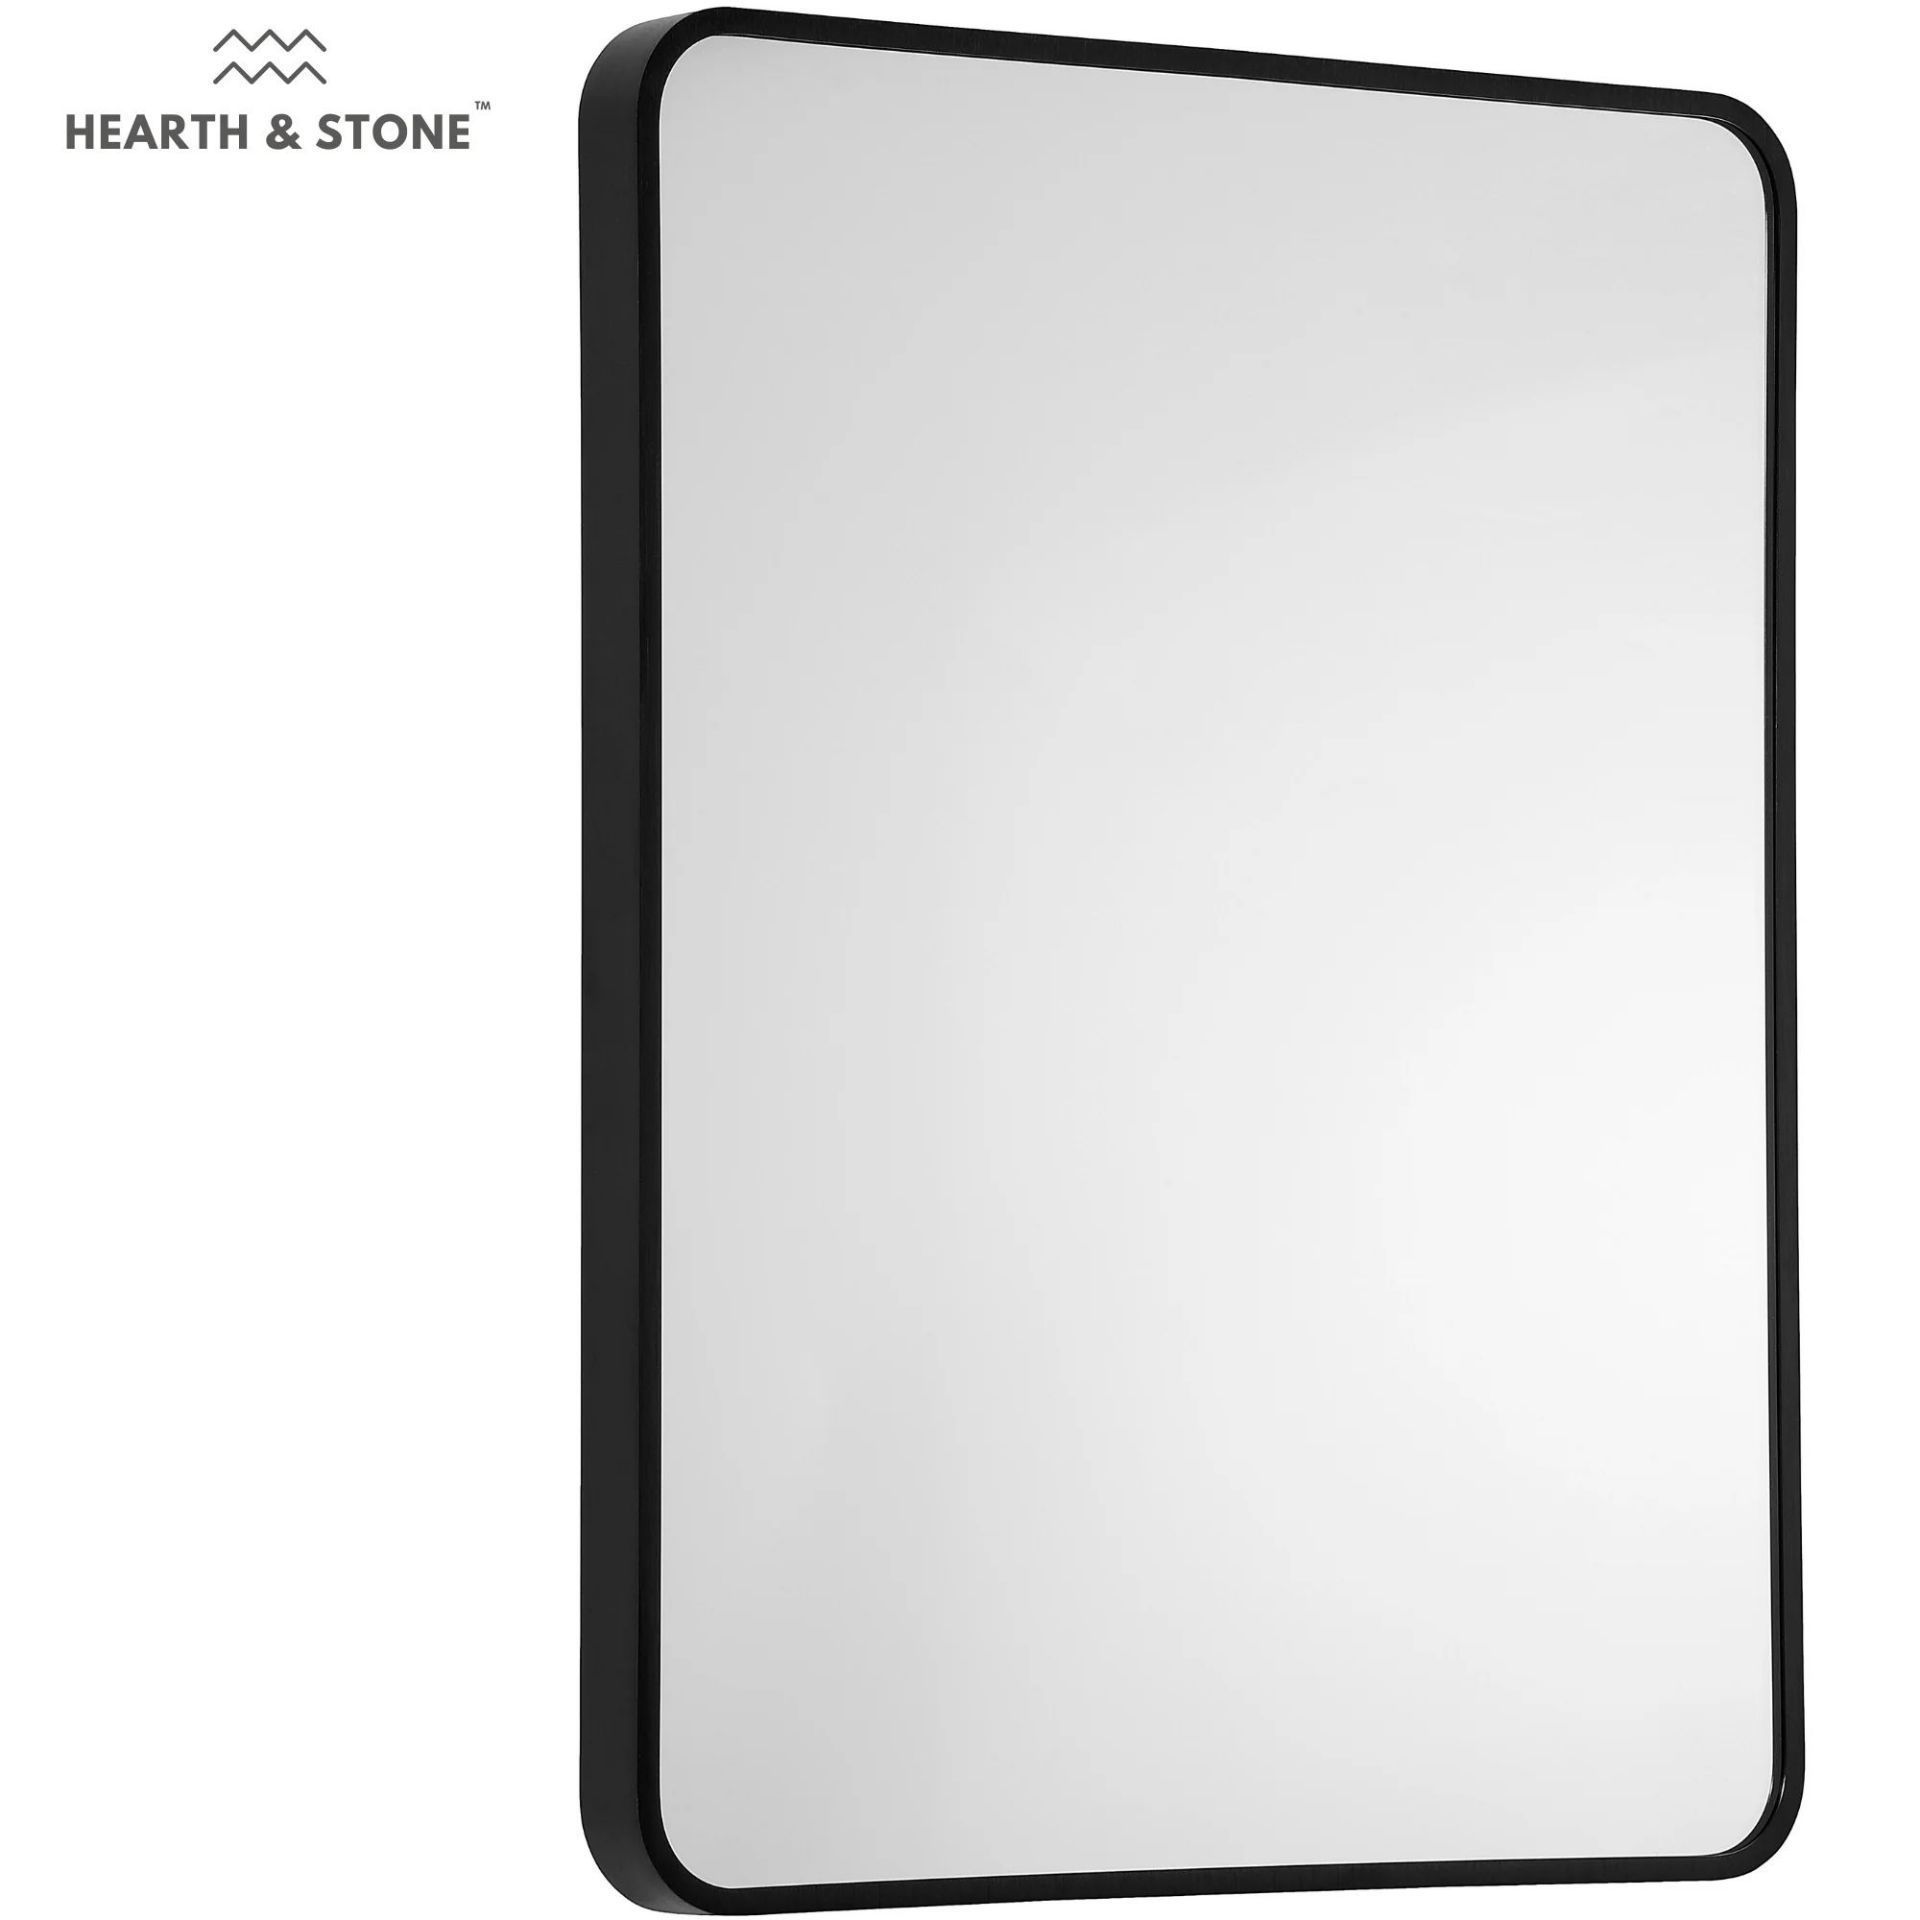 BRAND NEW HEARTH AND STONE LUXURY BLACK FRAMED MIRROR RRP £199 R7.3 - Image 2 of 2